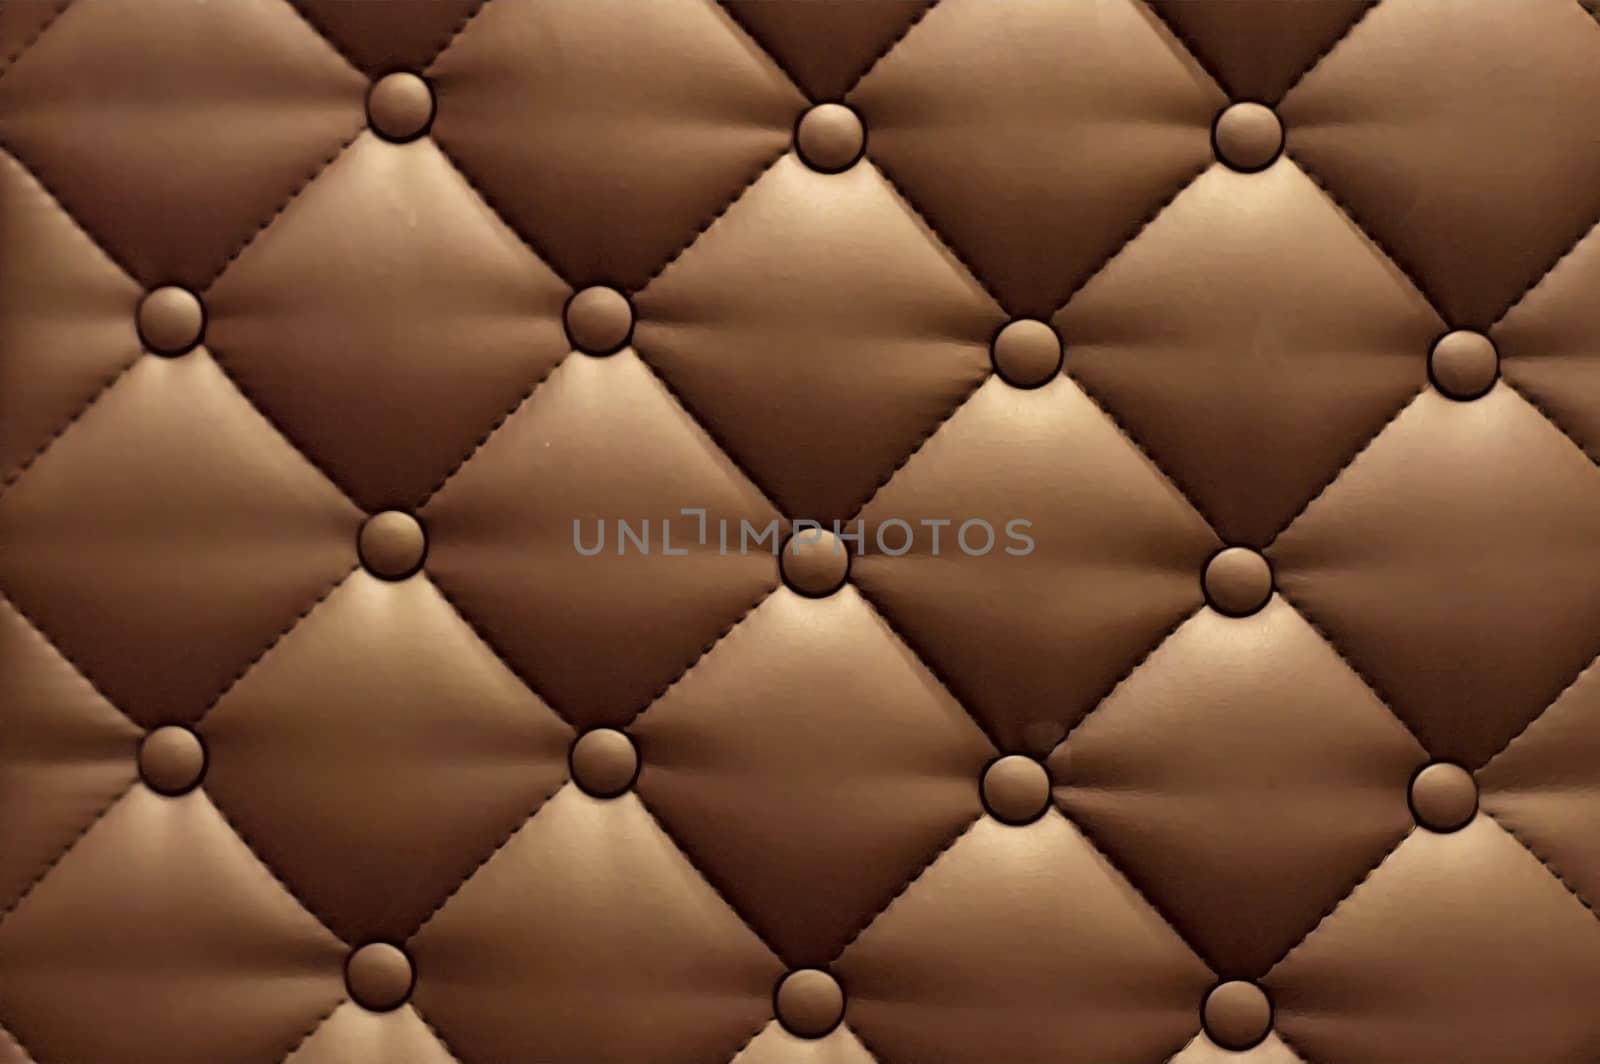 Textural rhomb ornament on brown upholstery. Close up. by Essffes